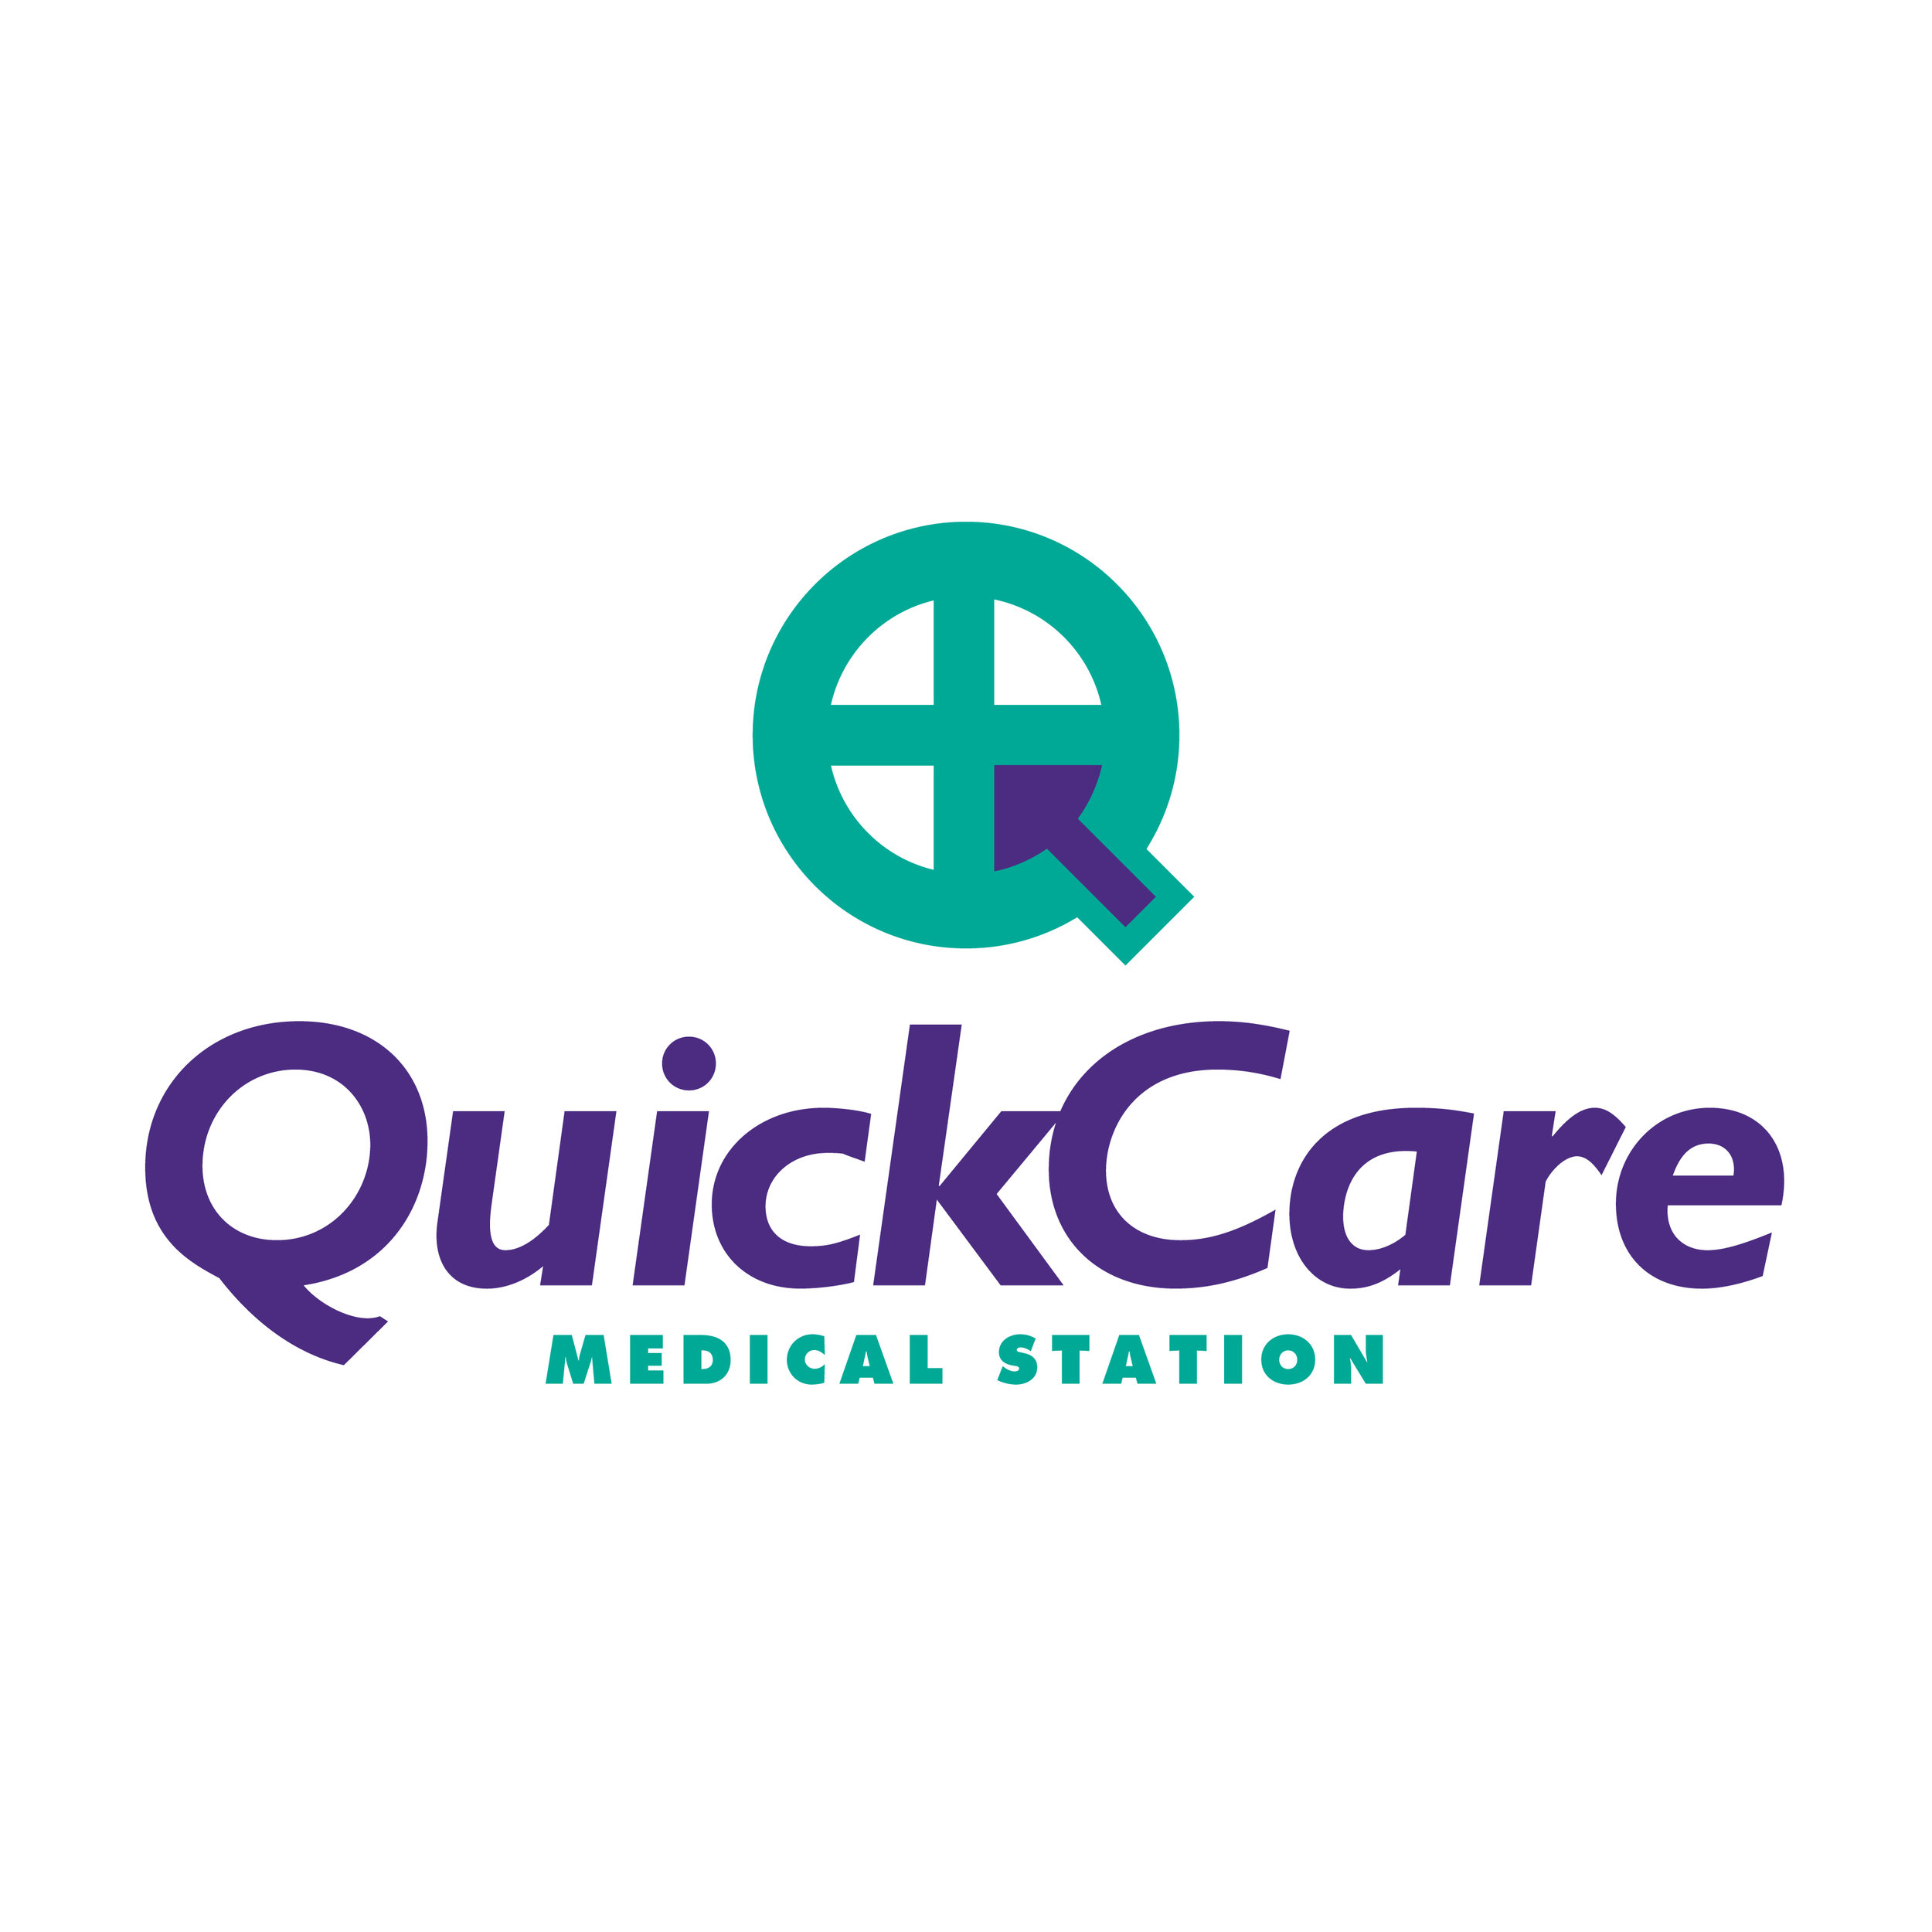  QuickCare facility and services  The MED, Regional Medical Center at Memphis   Branding creative and design by Chuck Mitchell 